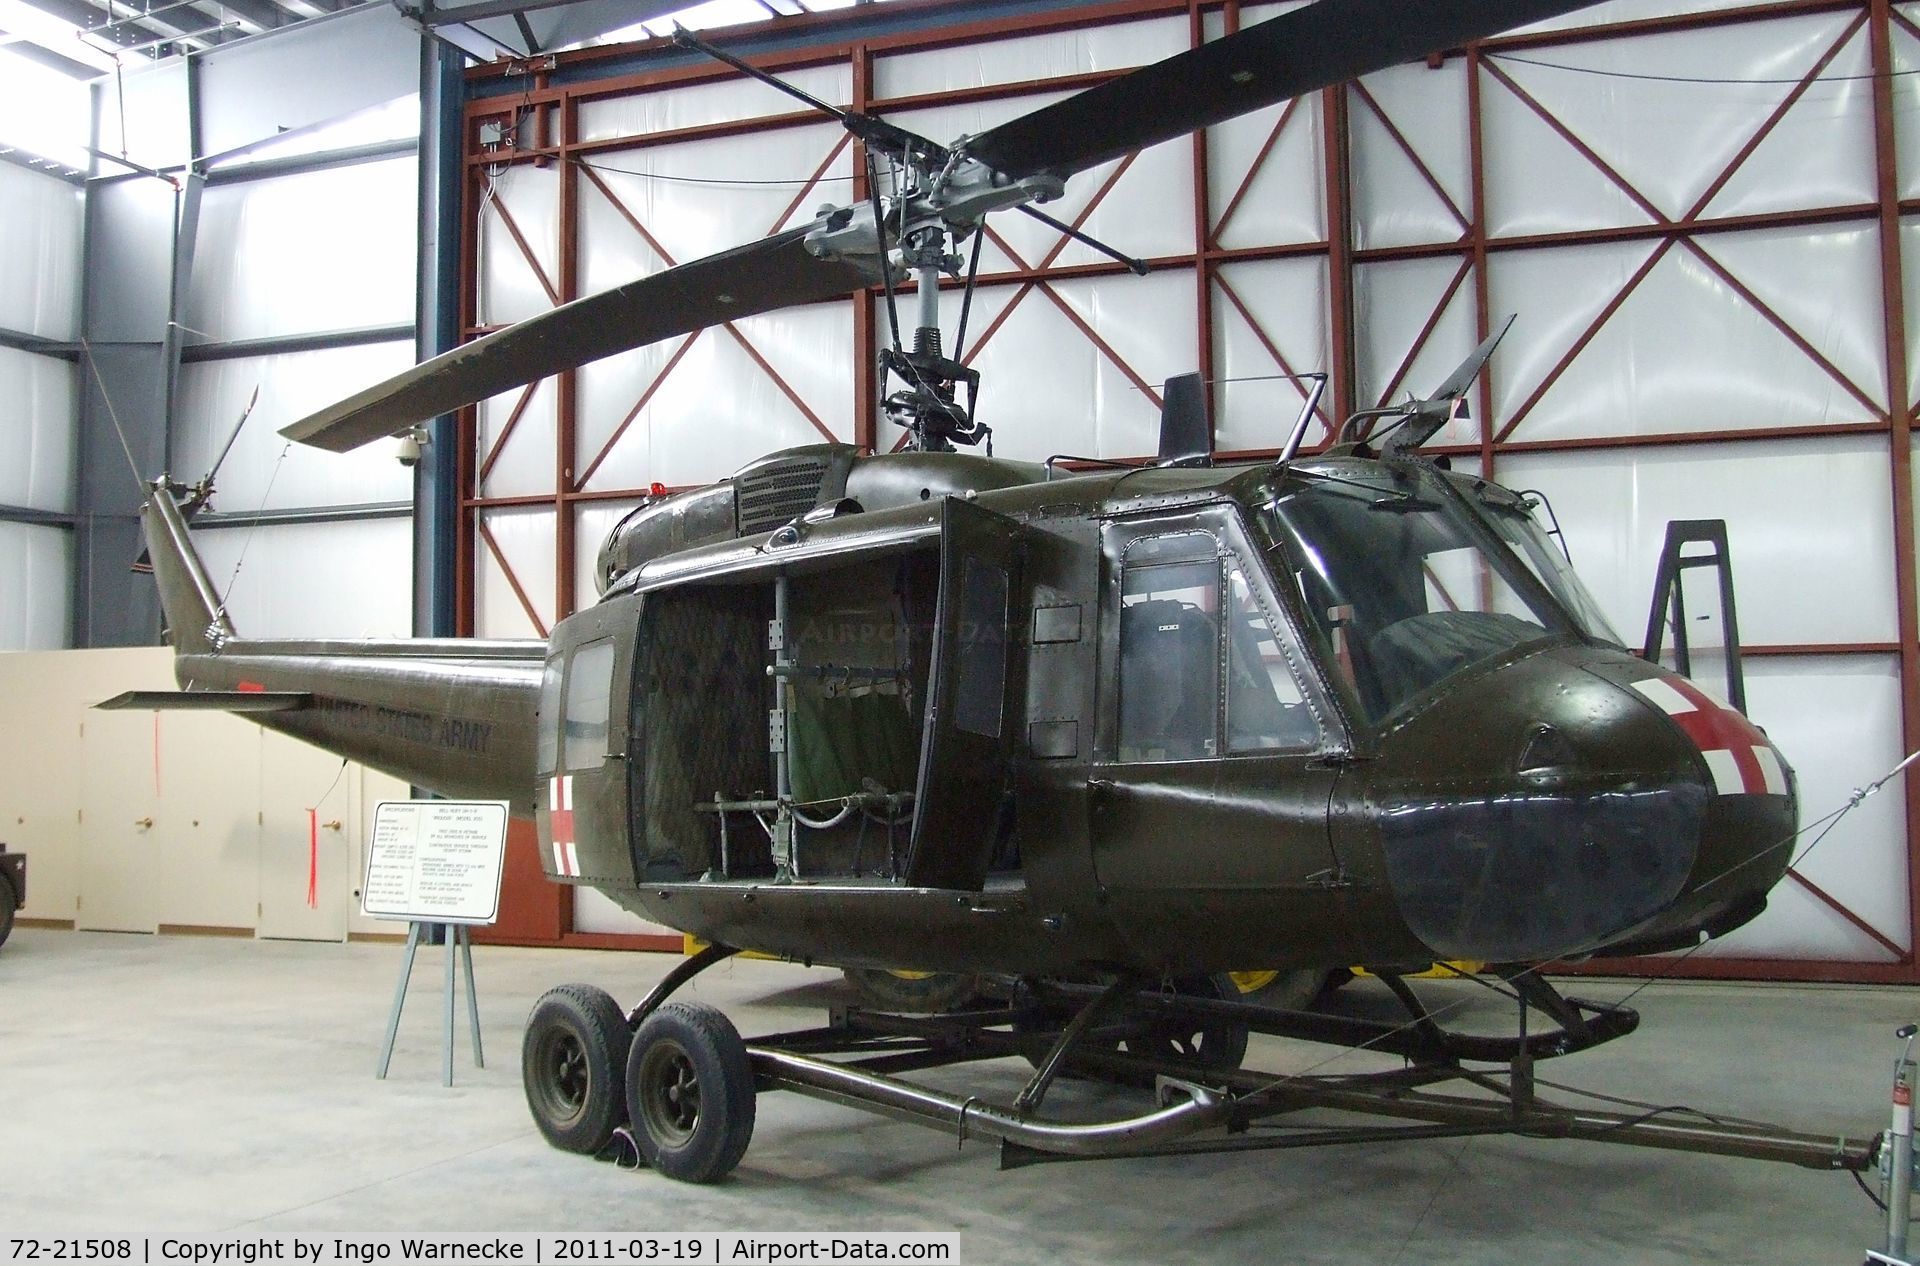 72-21508, 1972 Bell UH-1H Iroquois C/N 13207, Bell UH-1H Iroquois at the Pueblo Weisbrod Aircraft Museum, Pueblo CO